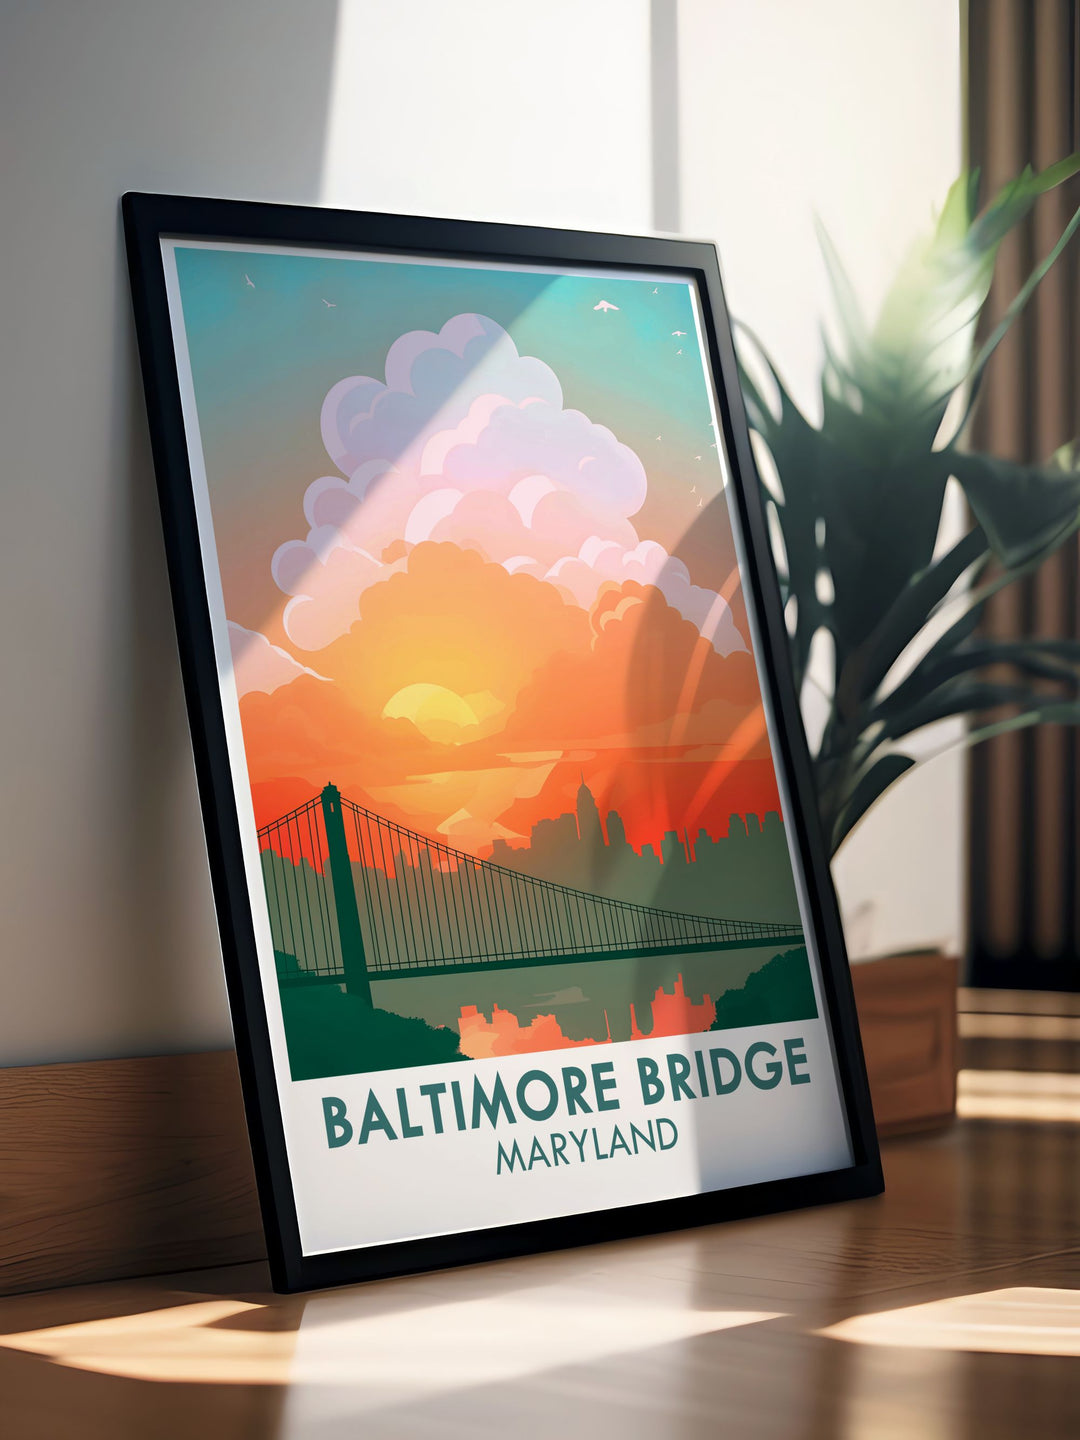 Beautiful Maryland print depicting the new Key Bridge design in Baltimore. The artwork captures the essence of the bridge and city, making it a unique addition to any home decor. Ideal for housewarming gifts and Baltimore art collections.